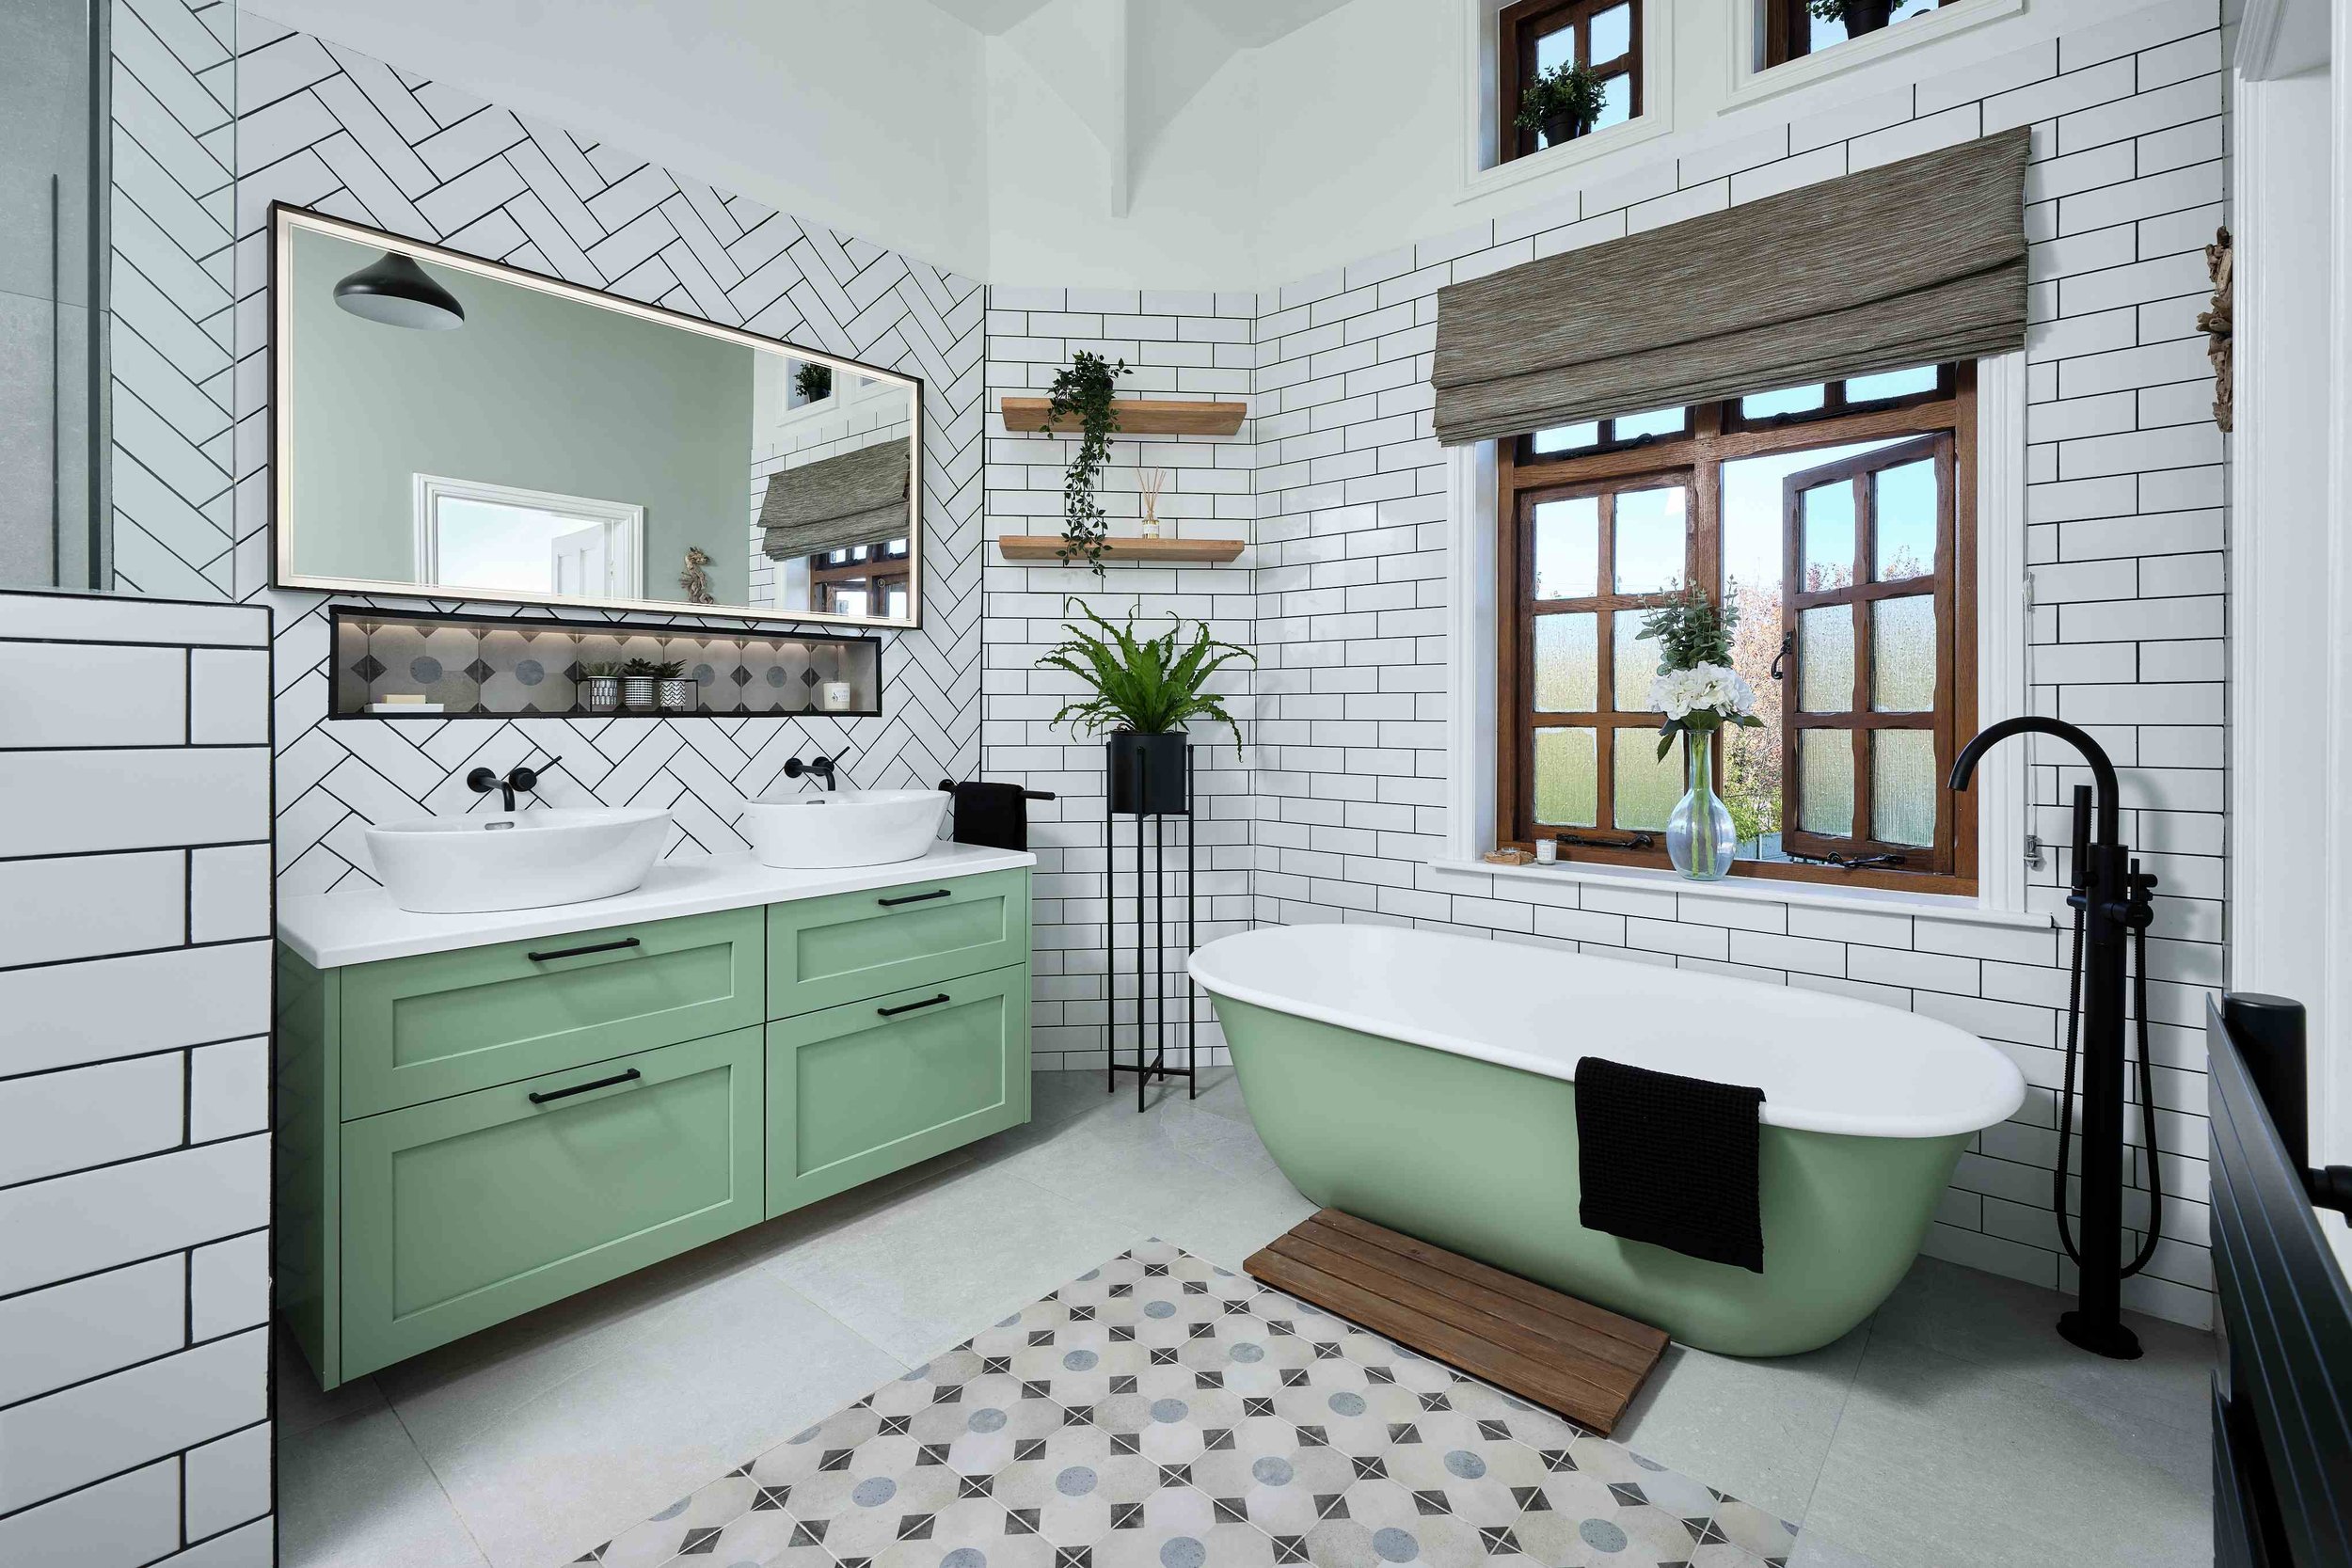 ripples-bathroom-with-green-furniture-and-metro-tiles.jpg